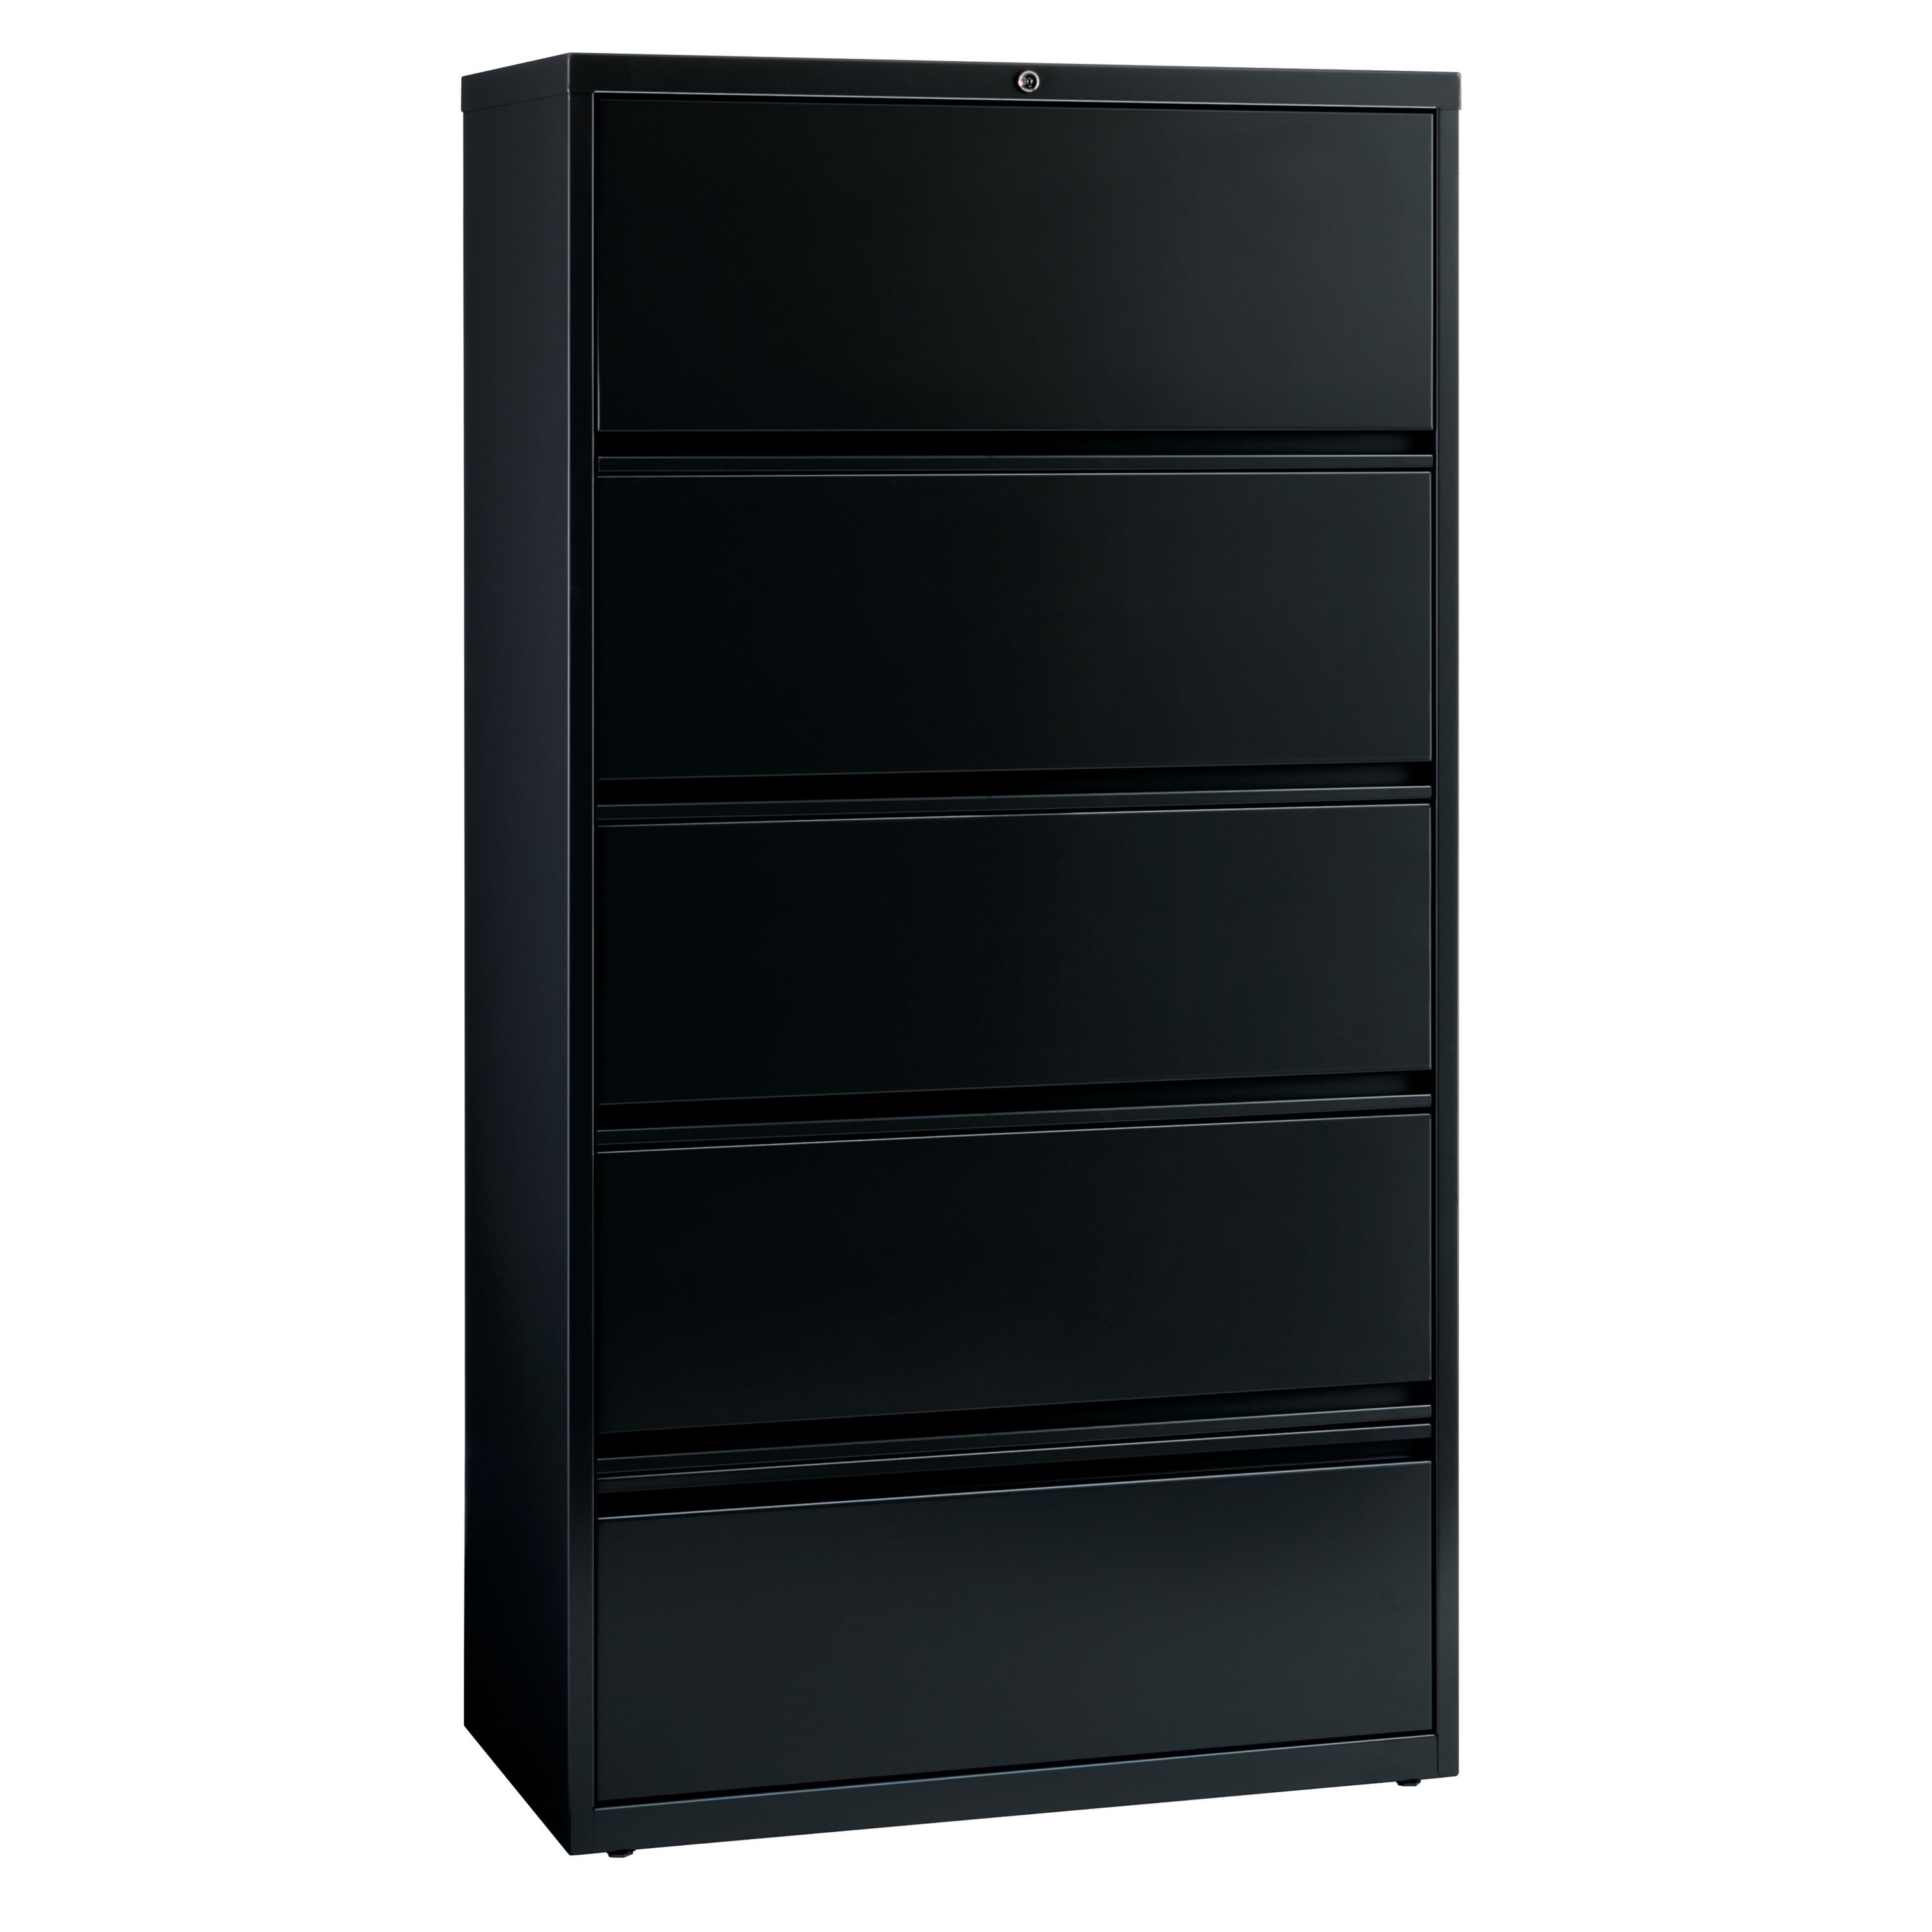 4Dr 36"W x 18"D x 62 3/4"H Lateral File Cabinet w/ Storage by Haworth Office 